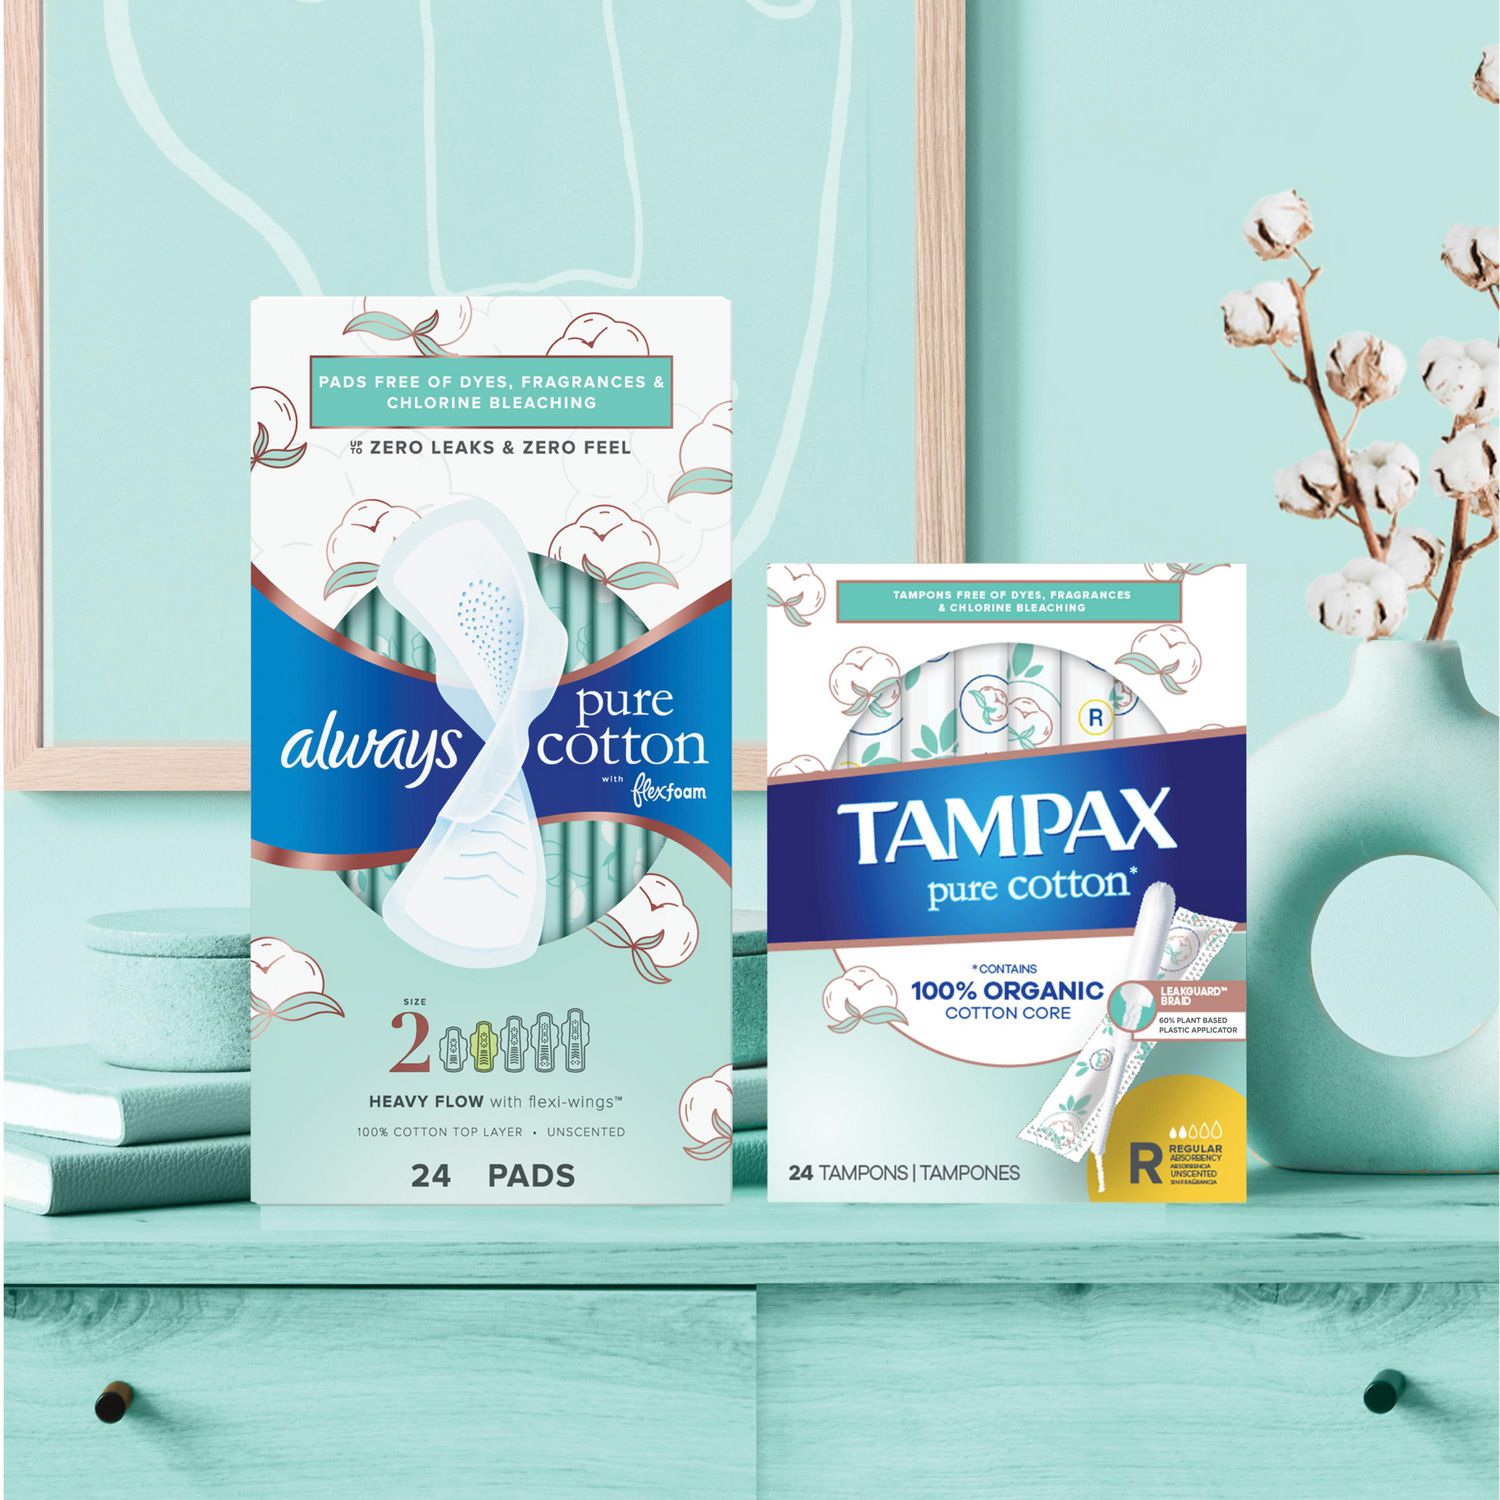 Shoppers Drug Mart: Always Zzz Overnight Pads, L. Organic Cotton Or Tampax  Pearl Tampons 